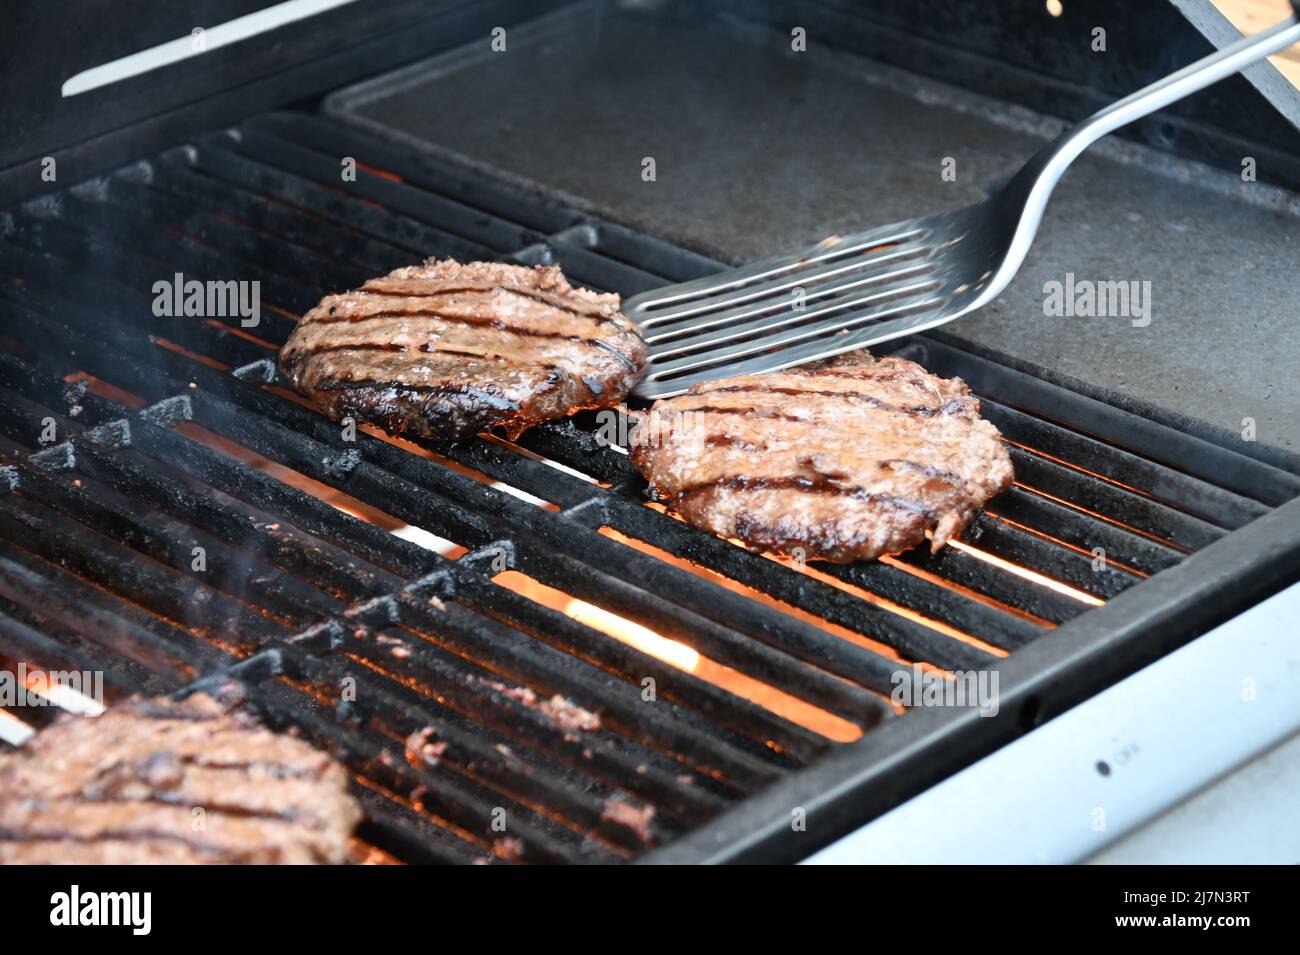 Flamed grilled beef burgers barbecued on an outdoor BBQ Stock Photo